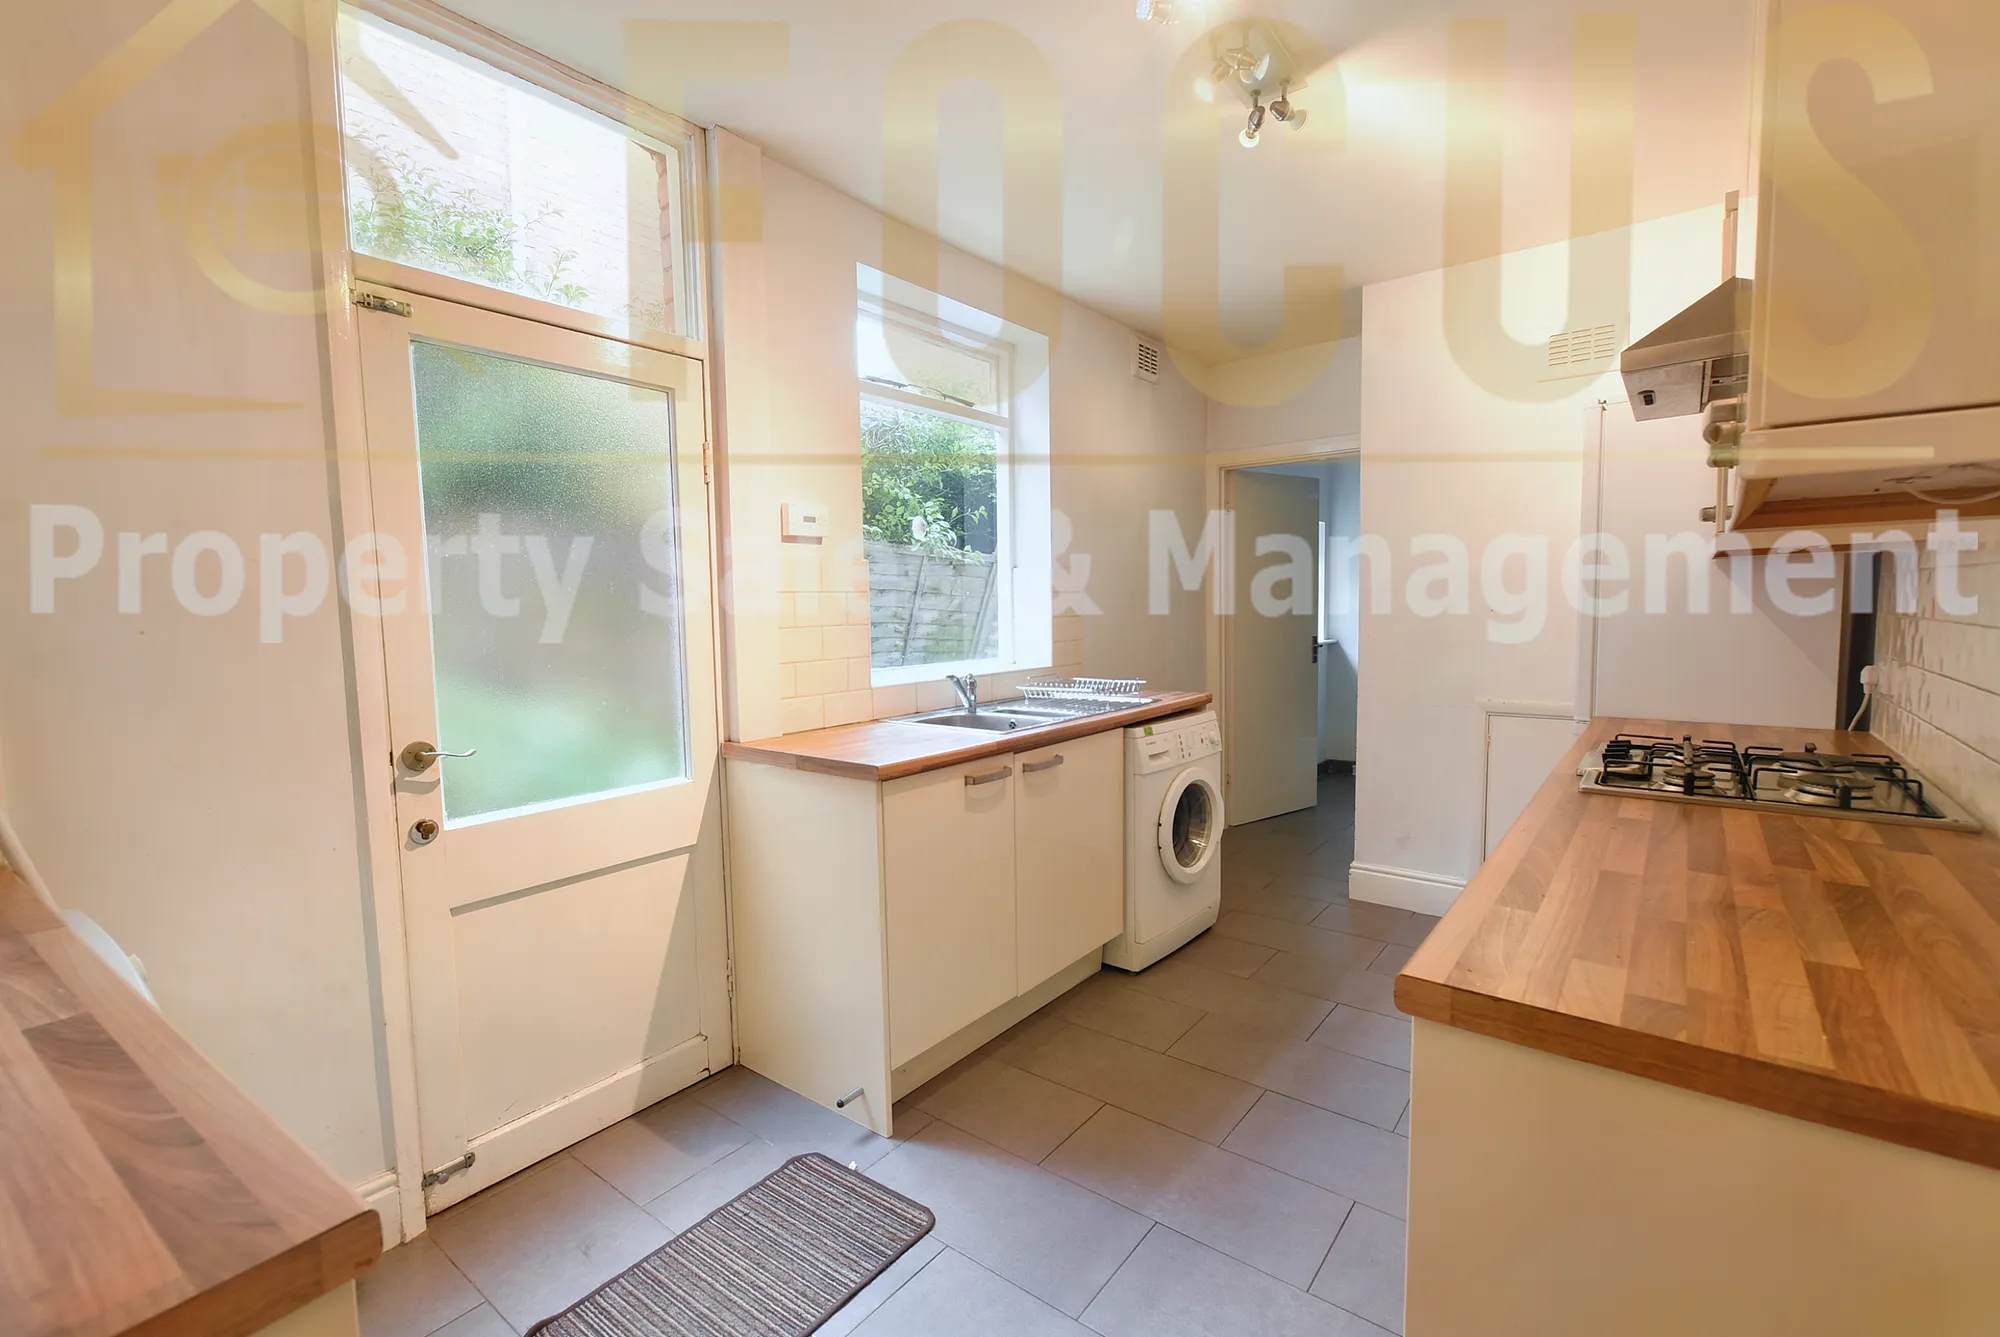 4 bed mid-terraced house to rent in Hartopp Road, Leicester  - Property Image 8